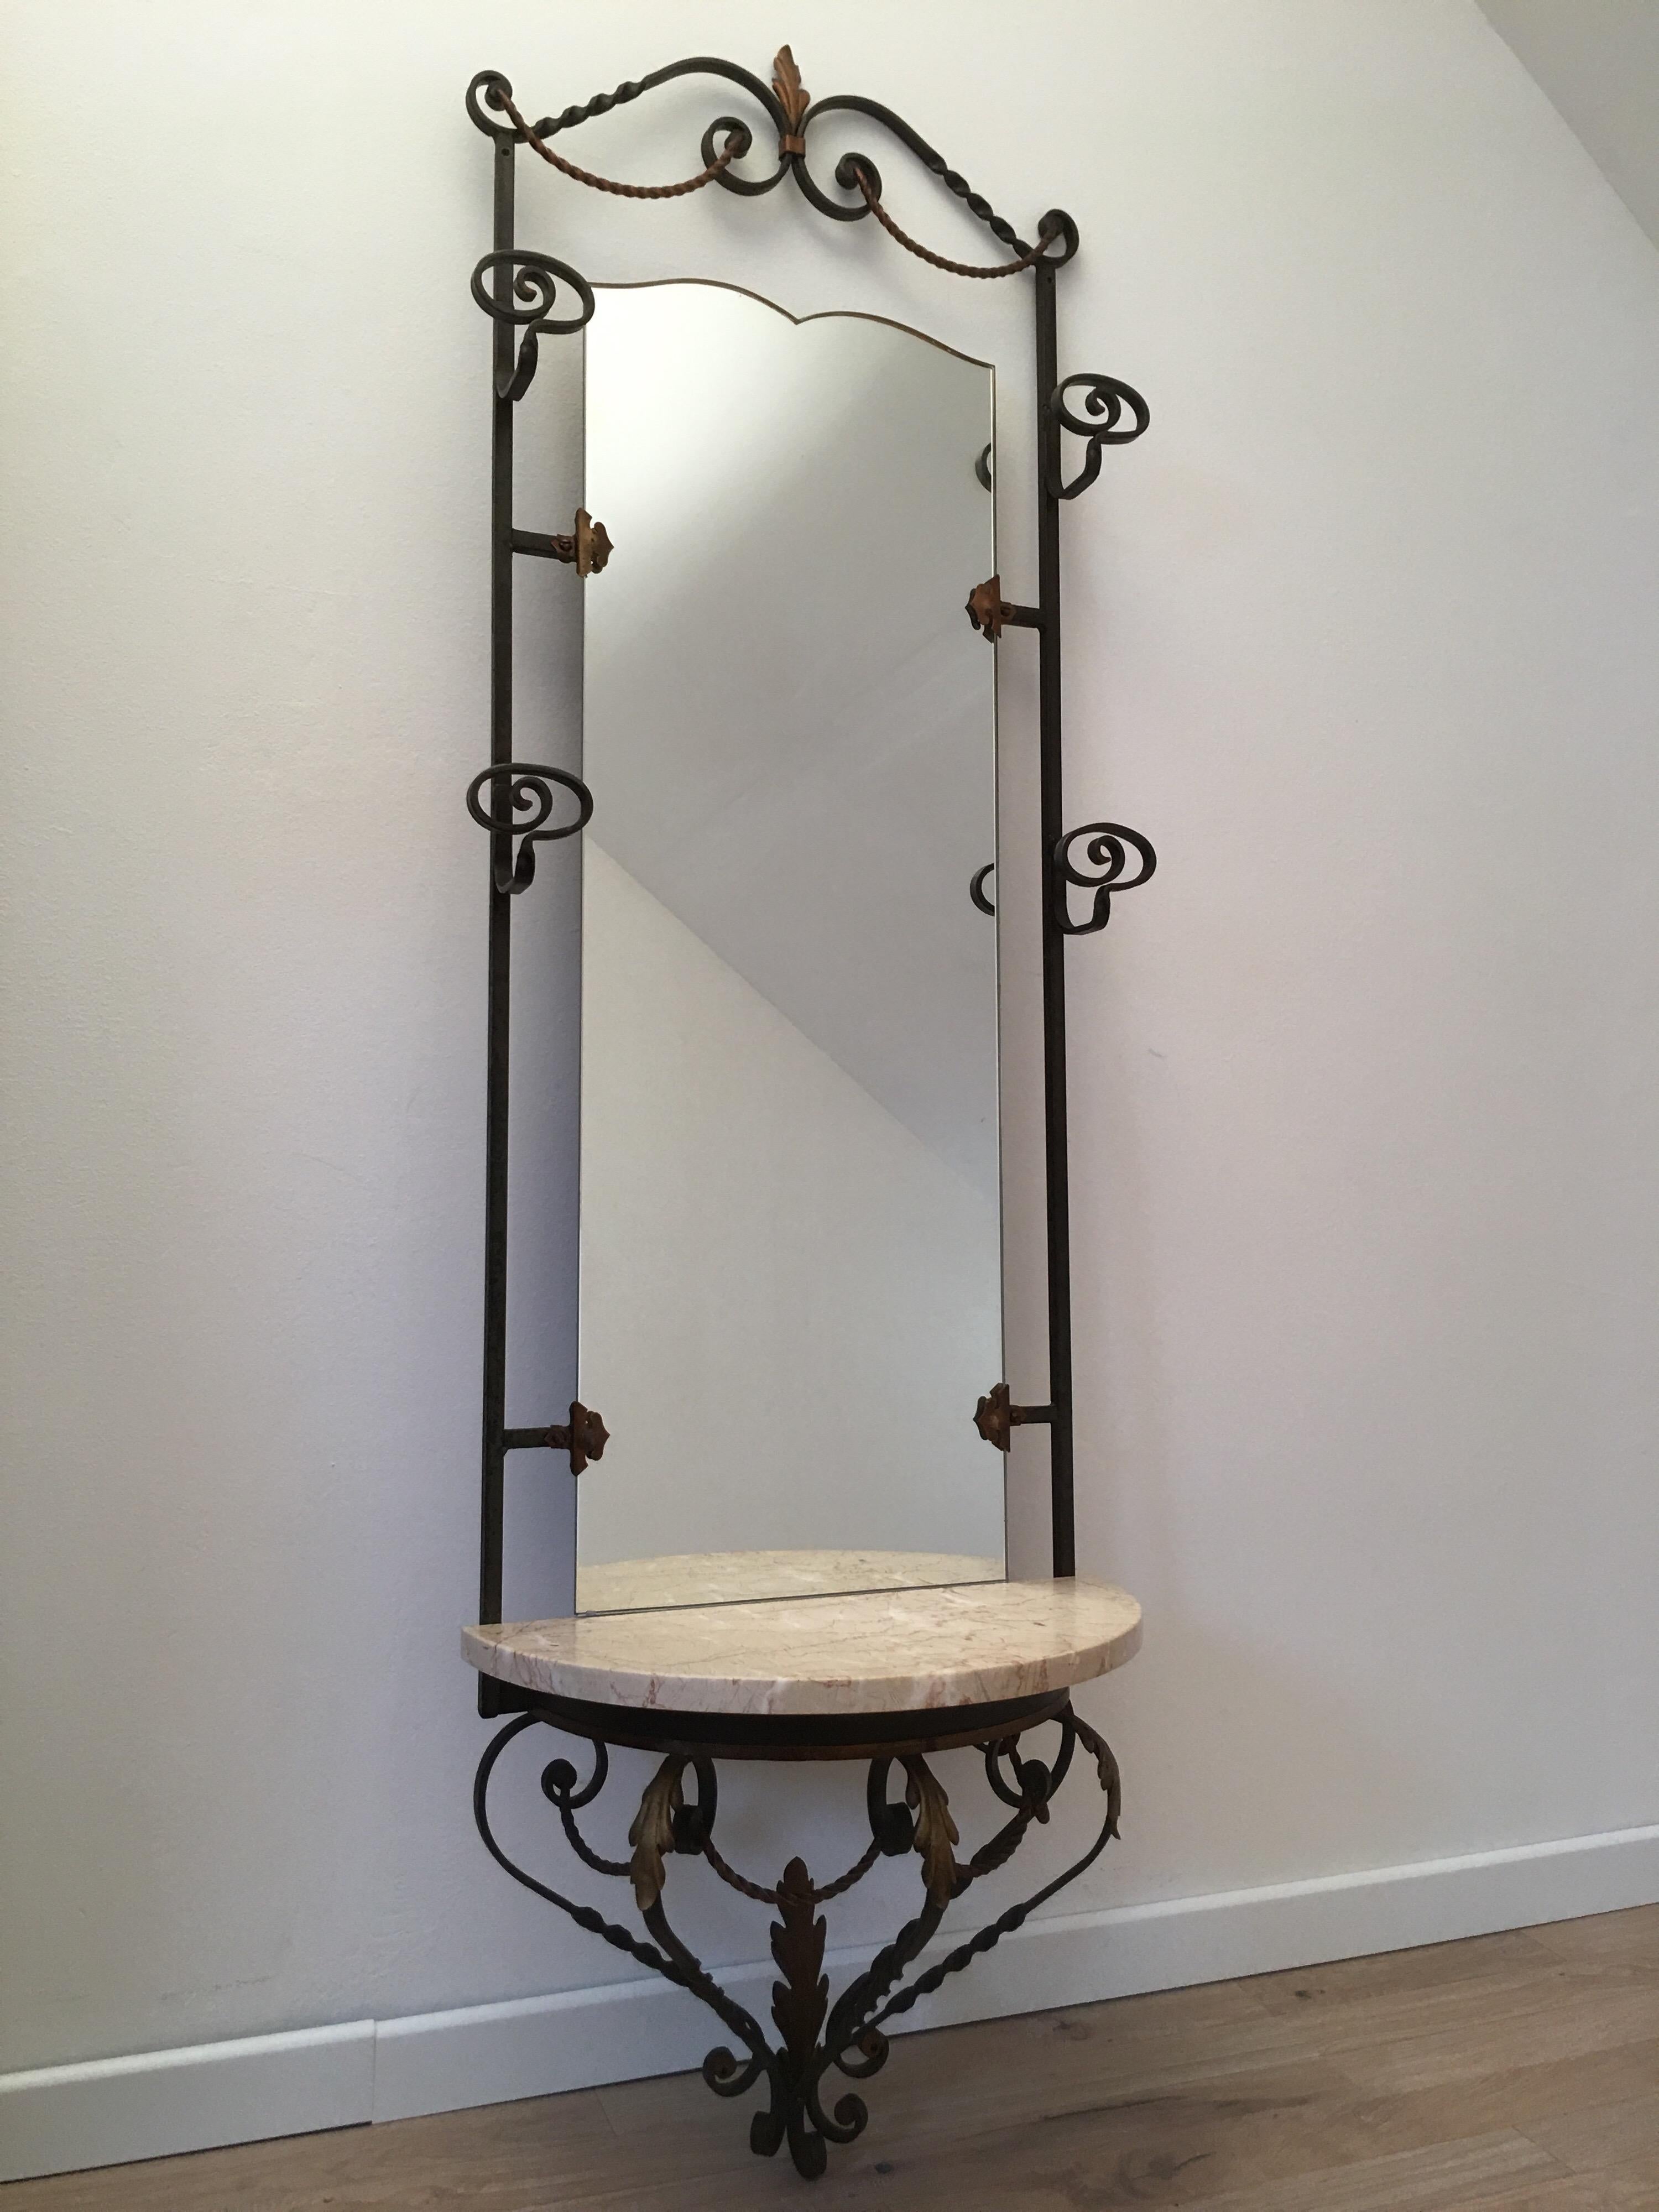 Very elegant wrought iron entrance vestibule attributed to Robert Merceris, master craftsman very active in the 40s and 50s in France. He began his career at Gilbert Poillerat, who has greatly influenced.
The cloakroom is composed of a central